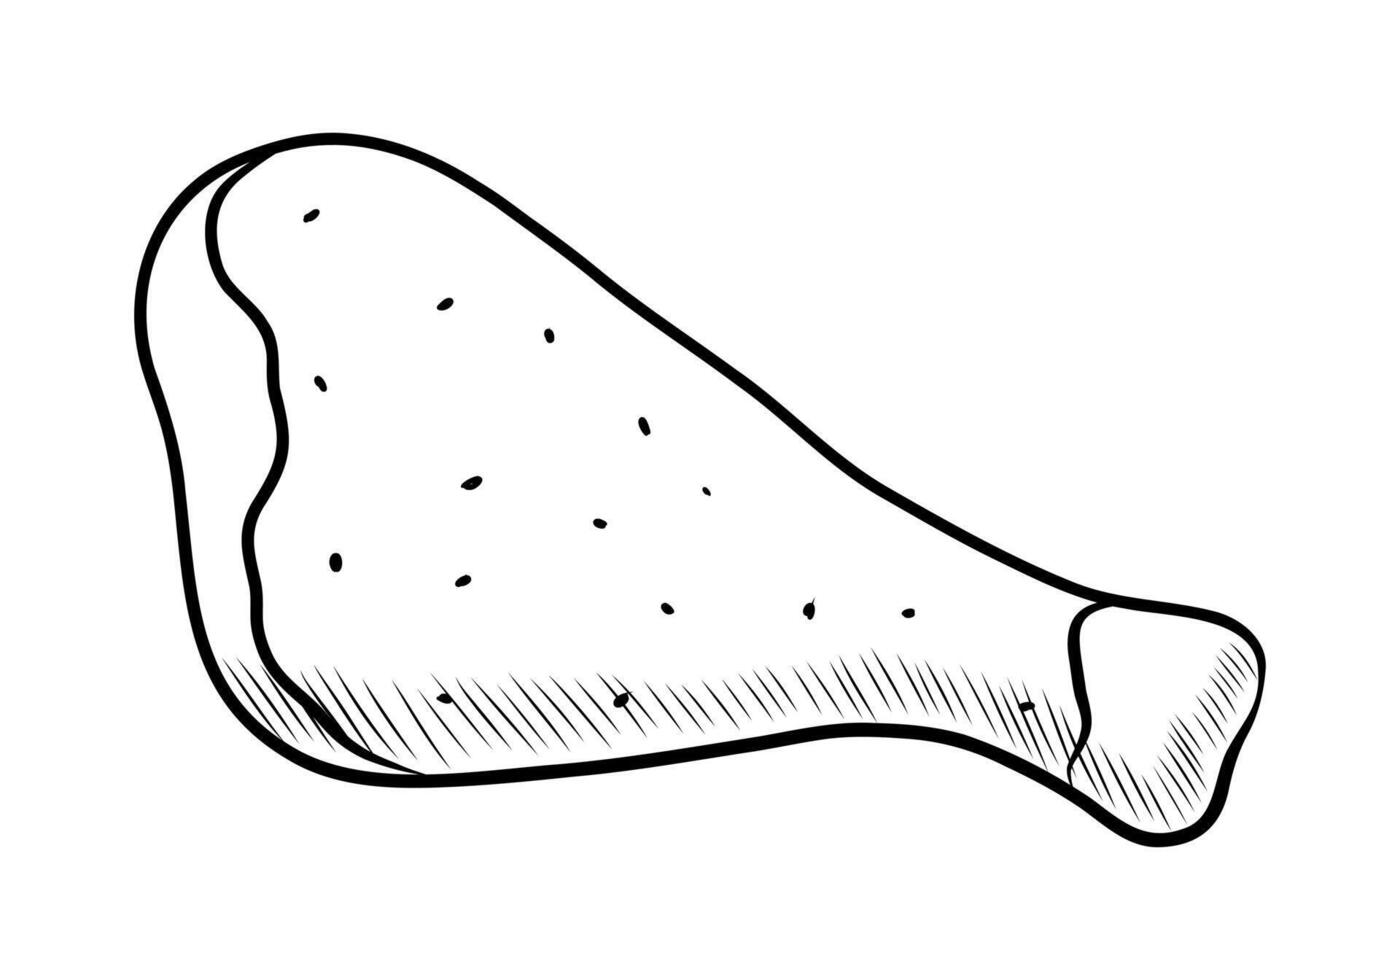 BLACK AND WHITE VECTOR DRAWING OF A CHICKEN LEG